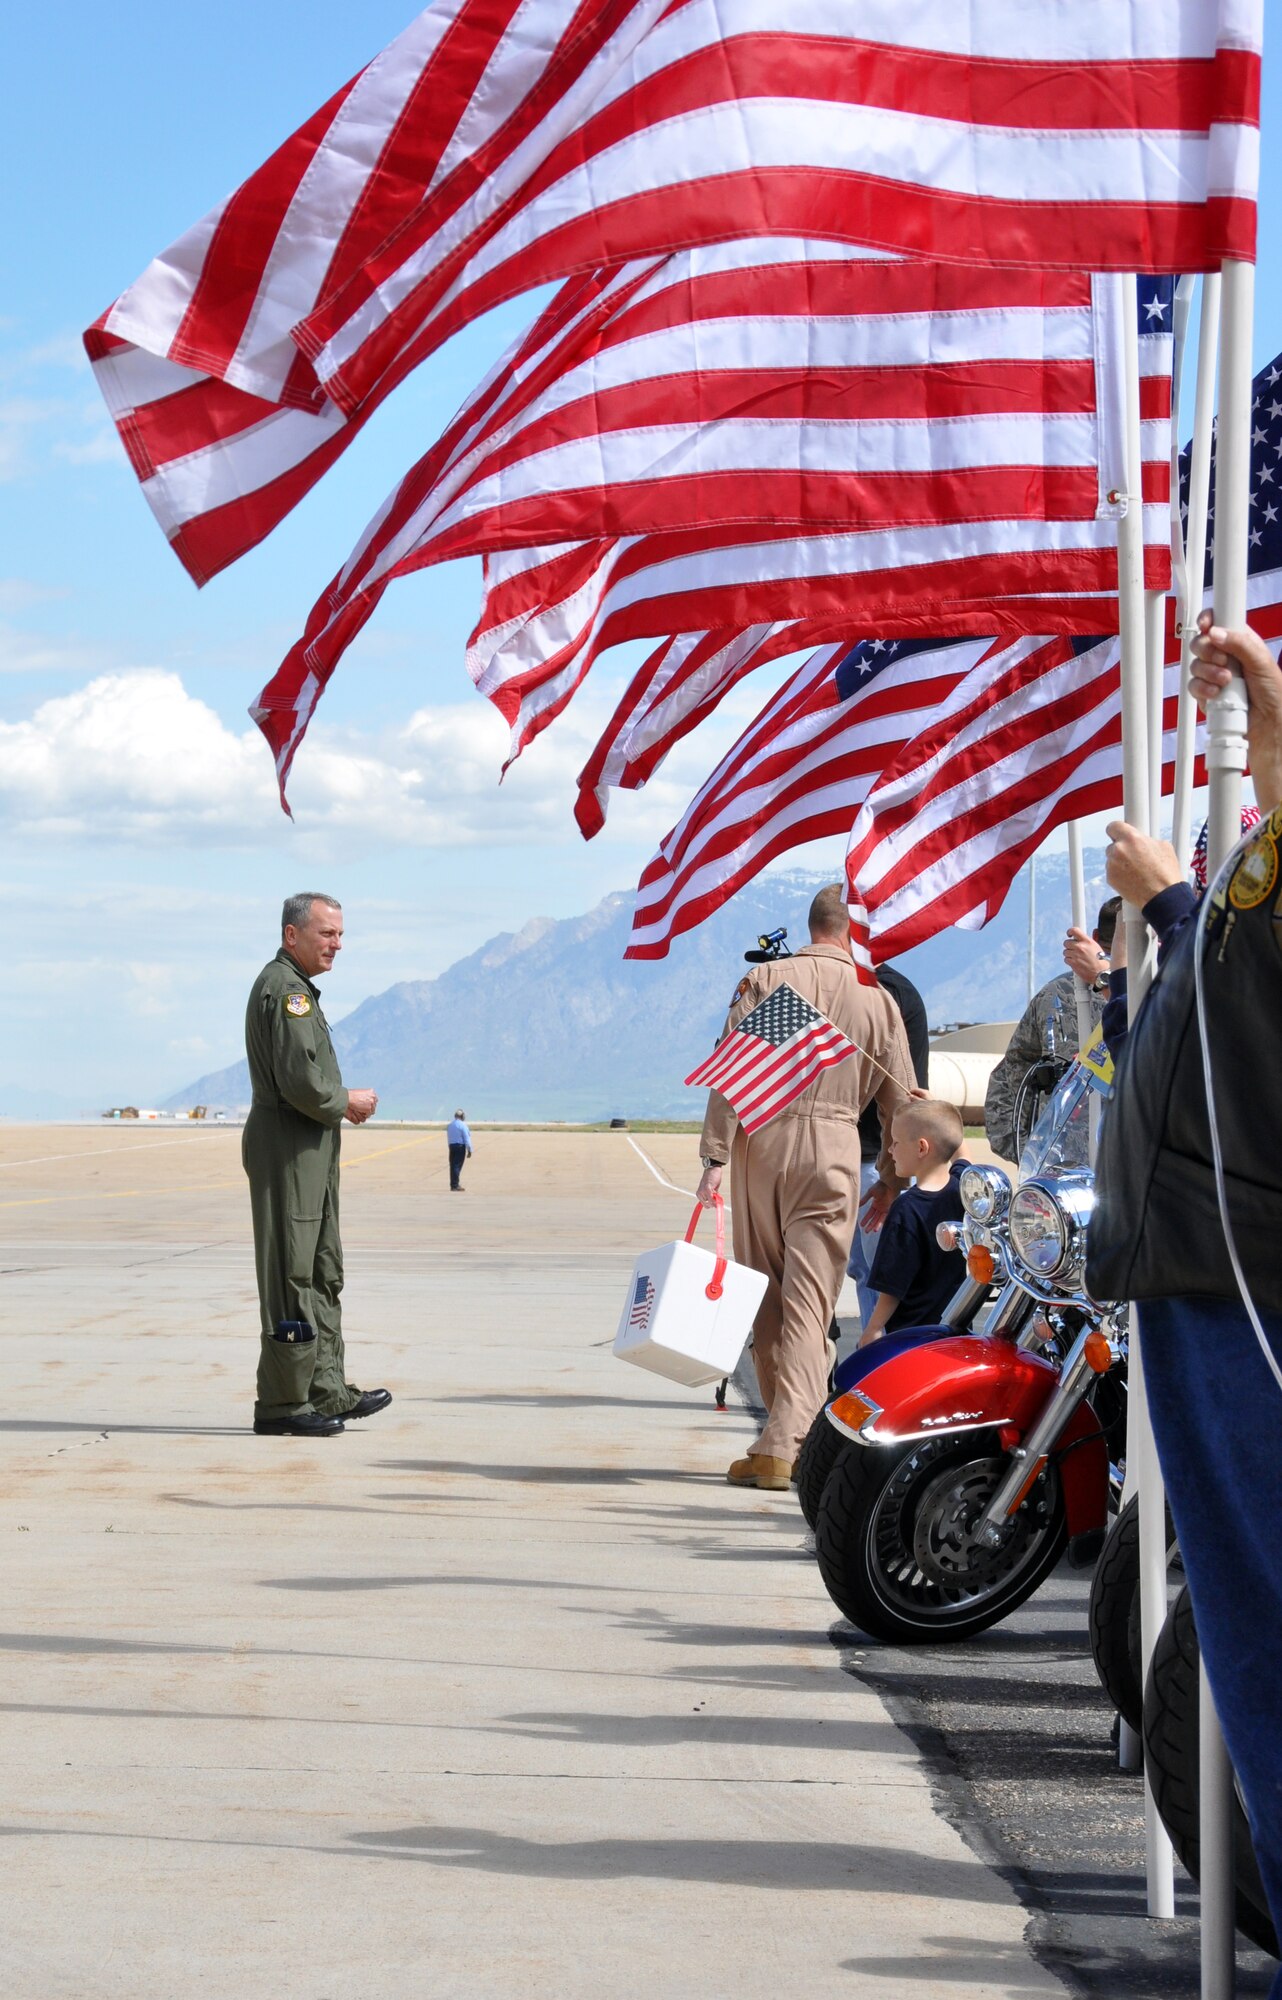 Col. Walter “Buck” Sams, 419th Fighter Wing commander, awaits arrival of the jet that will bring back about 300 Airmen from the 419th and 388th Fighter Wings. (U.S. Air Force photo/Bryan Magaña)